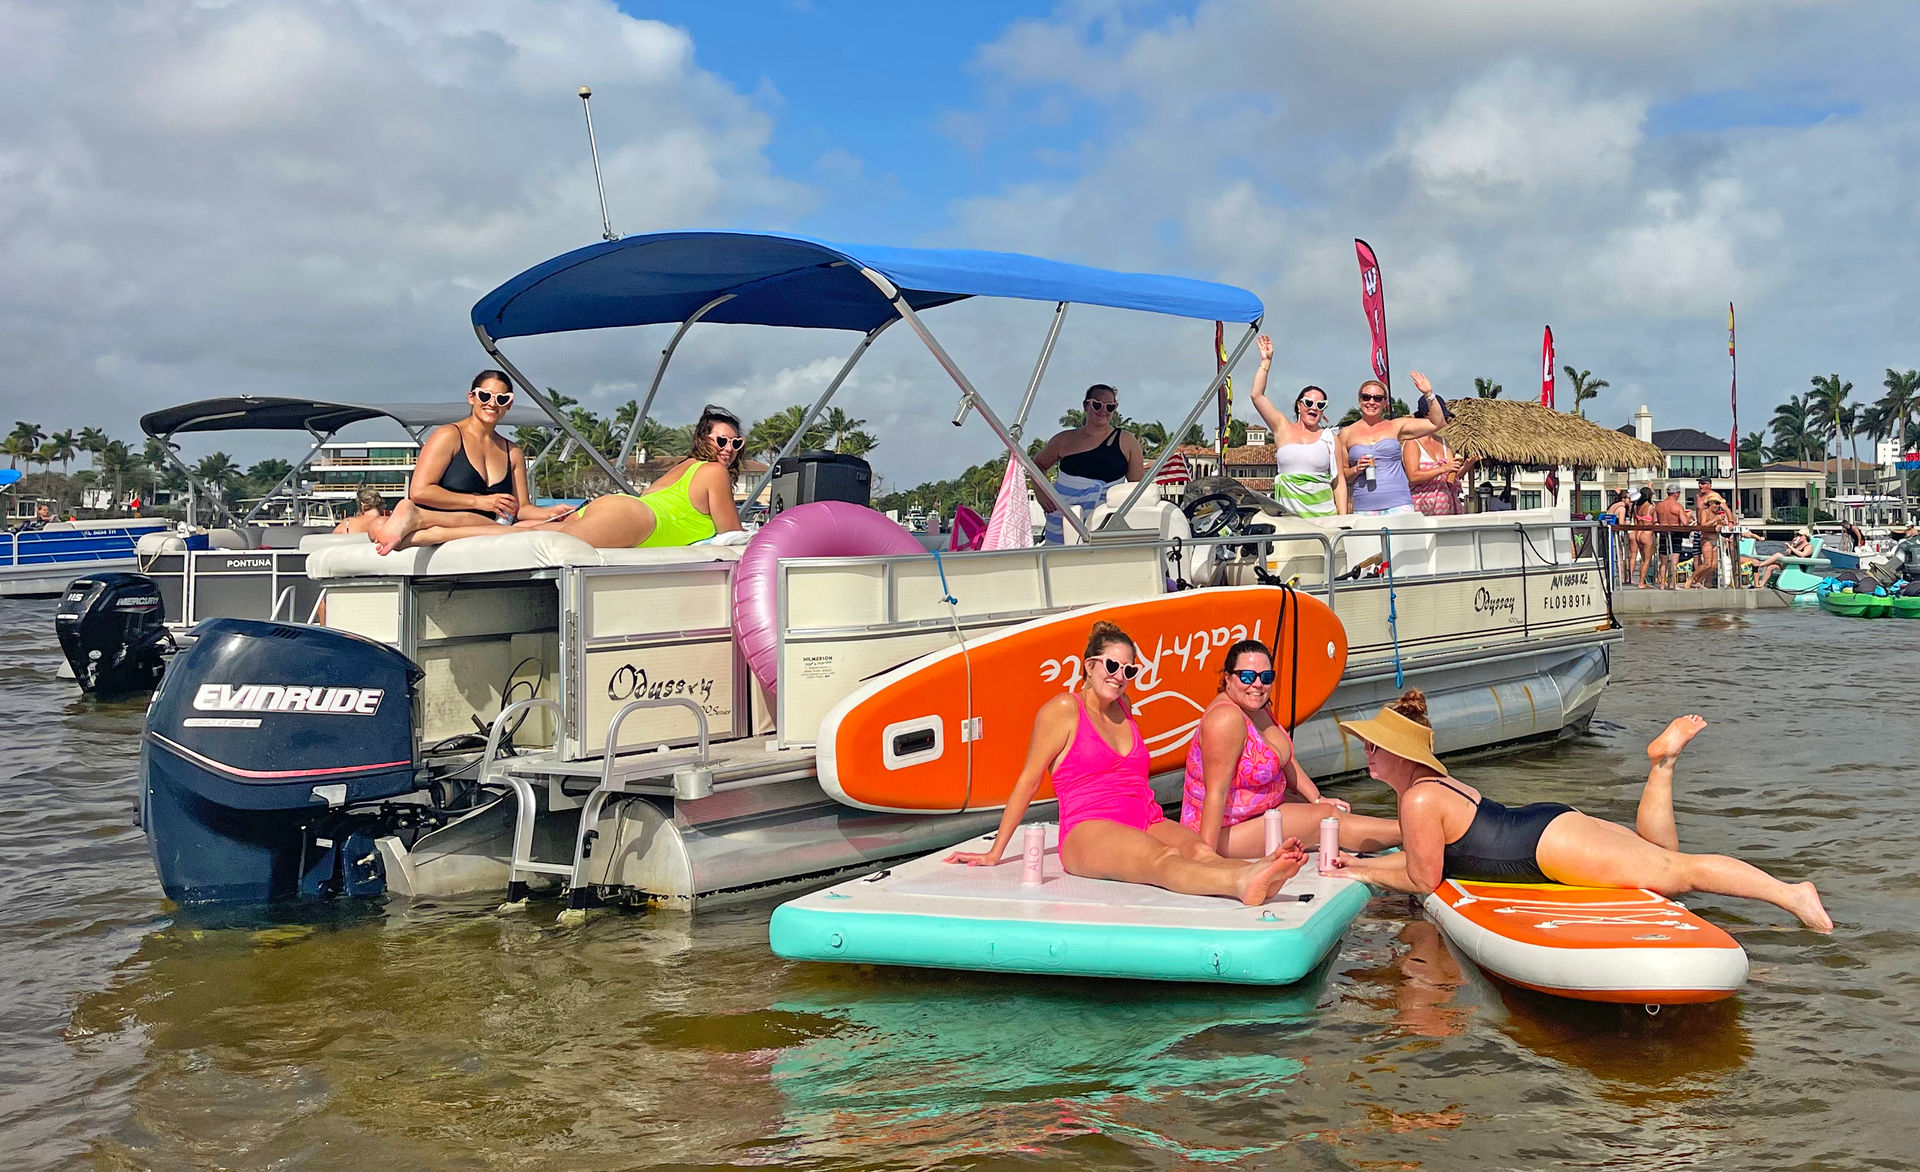 Pontoon Party Booze Cruise: Premium Water Toys & Party Essentials Included image 1